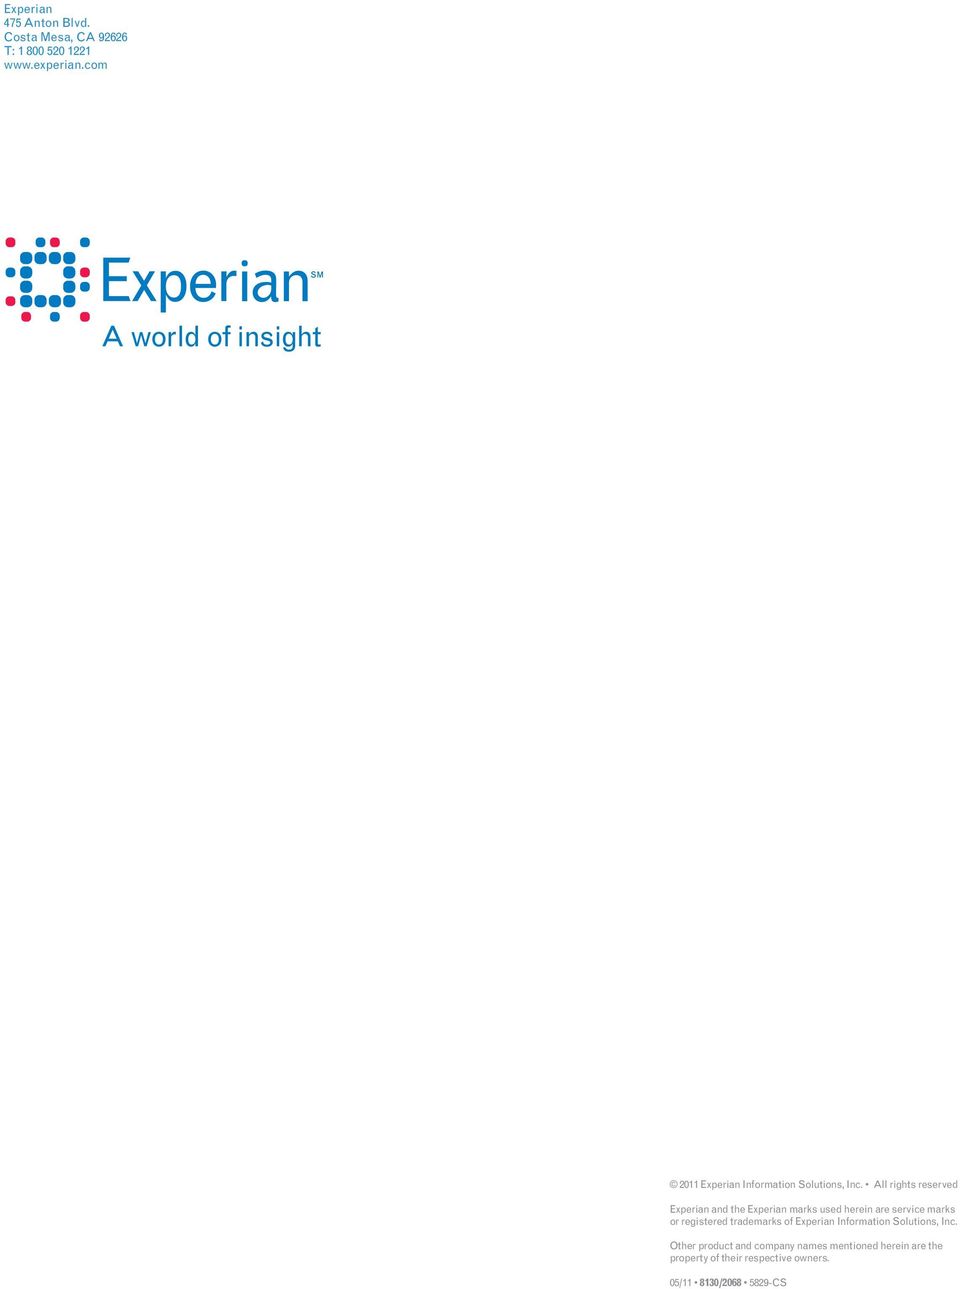 All rights reserved Experian and the Experian marks used herein are service marks or registered